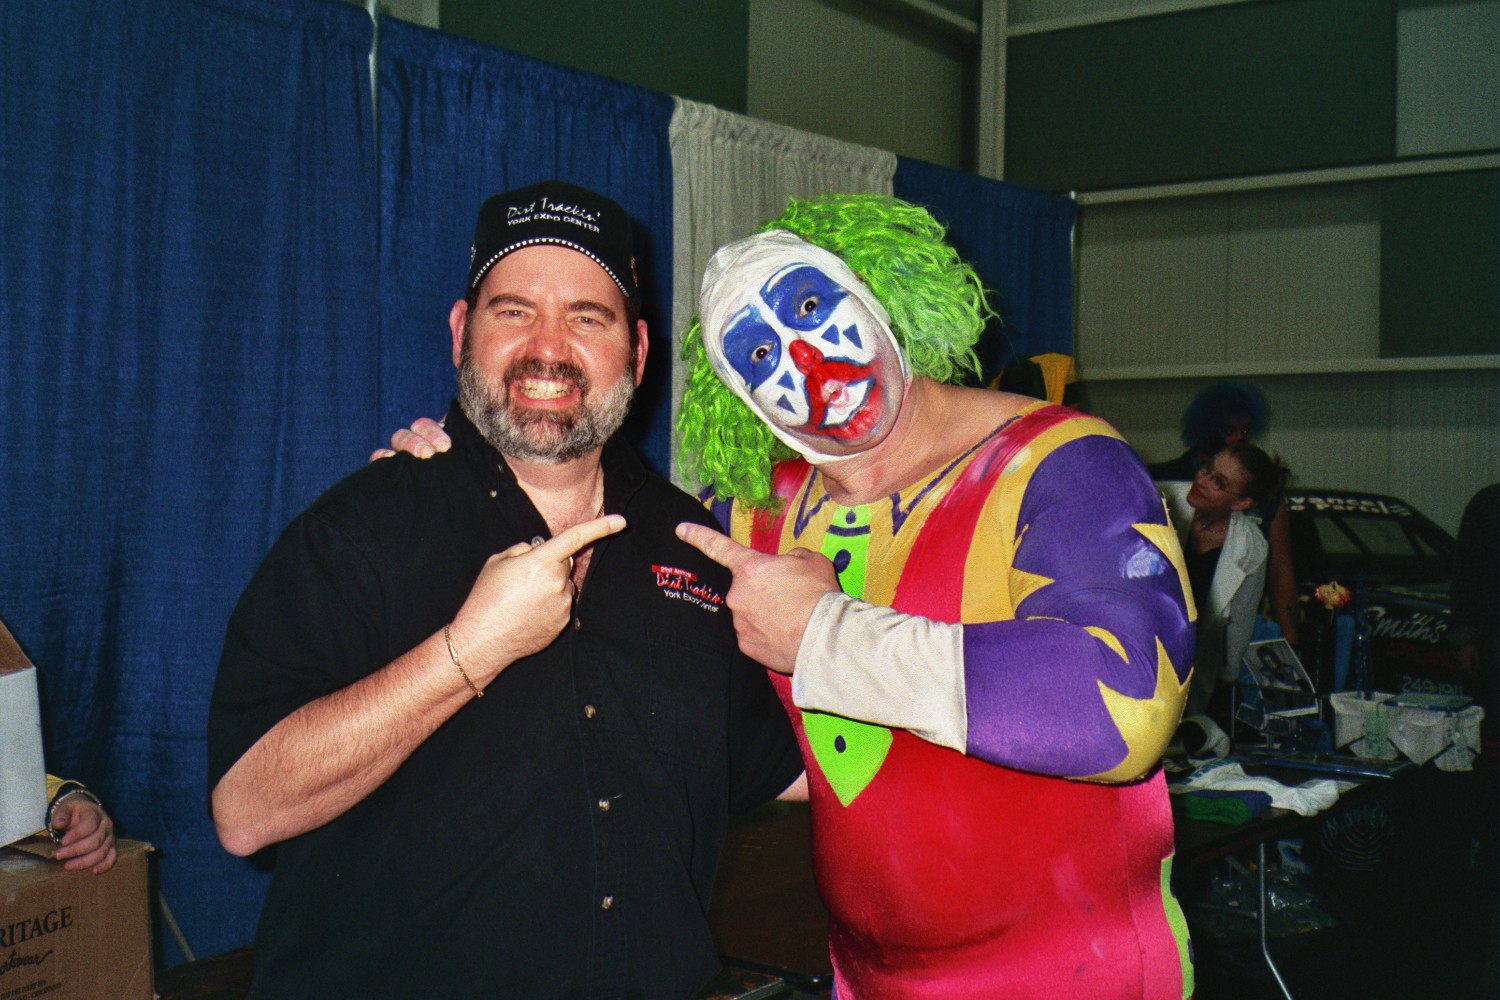 Doink the Clown & the Wise Guy
